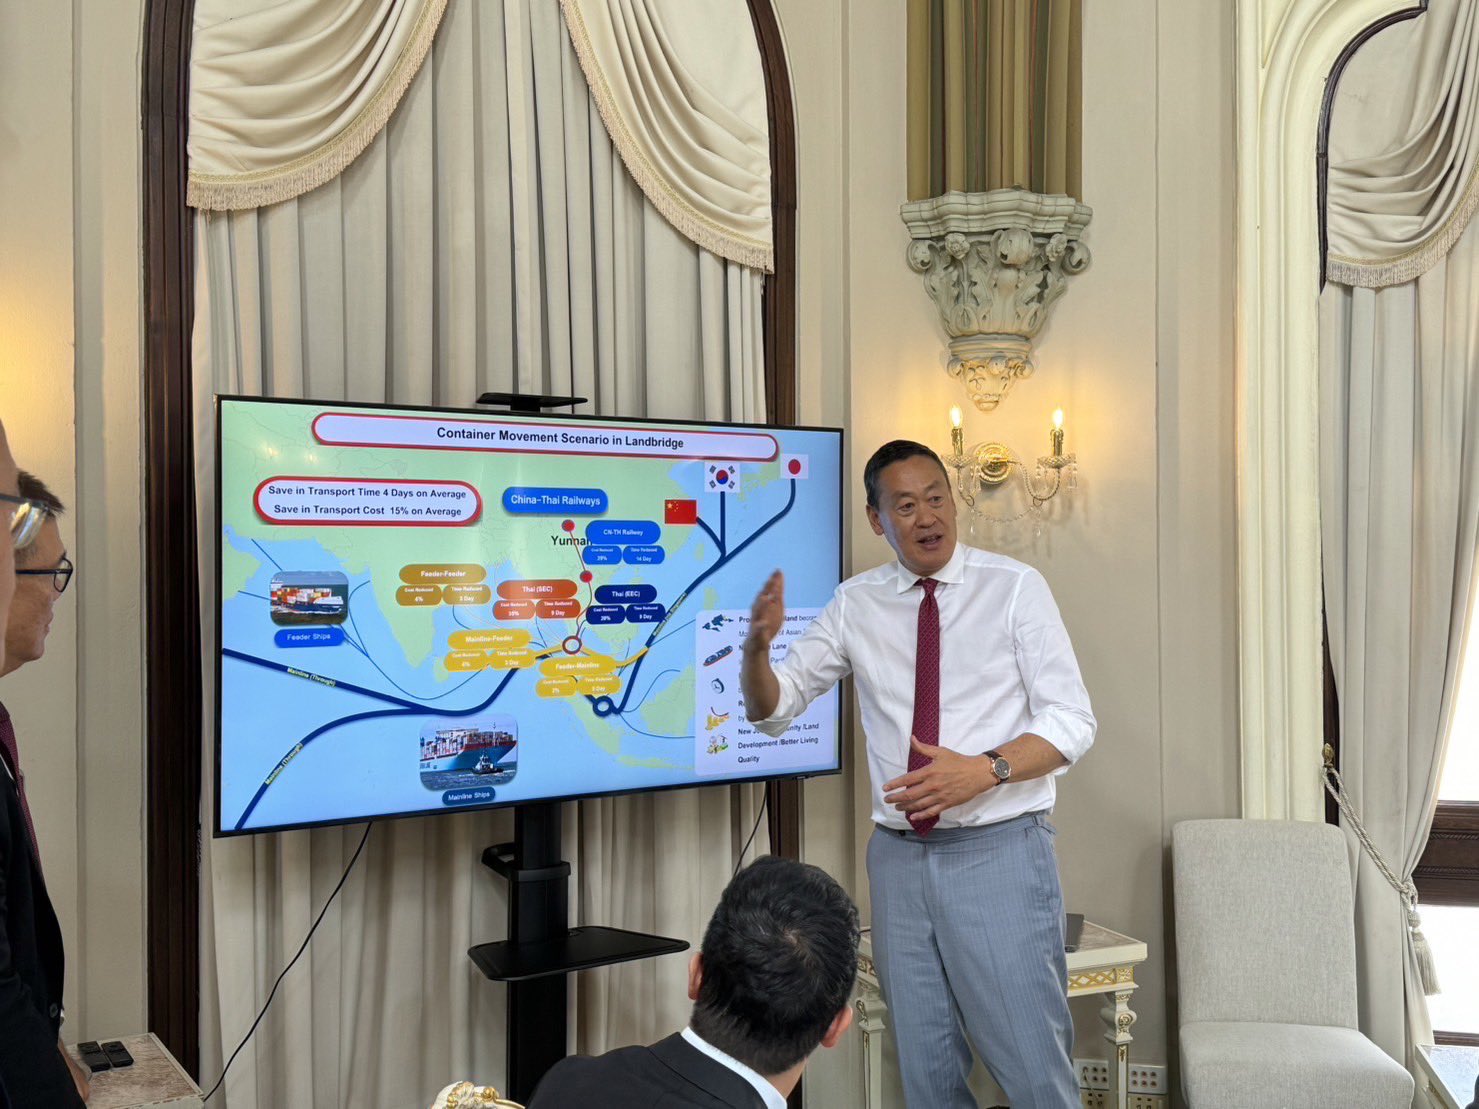 Thai Prime Minister Srettha Thavisin meets with Thai officials to discuss his pitch for the Landbridge infrastructure project, which he is bringing to the APEC summit in San Francisco